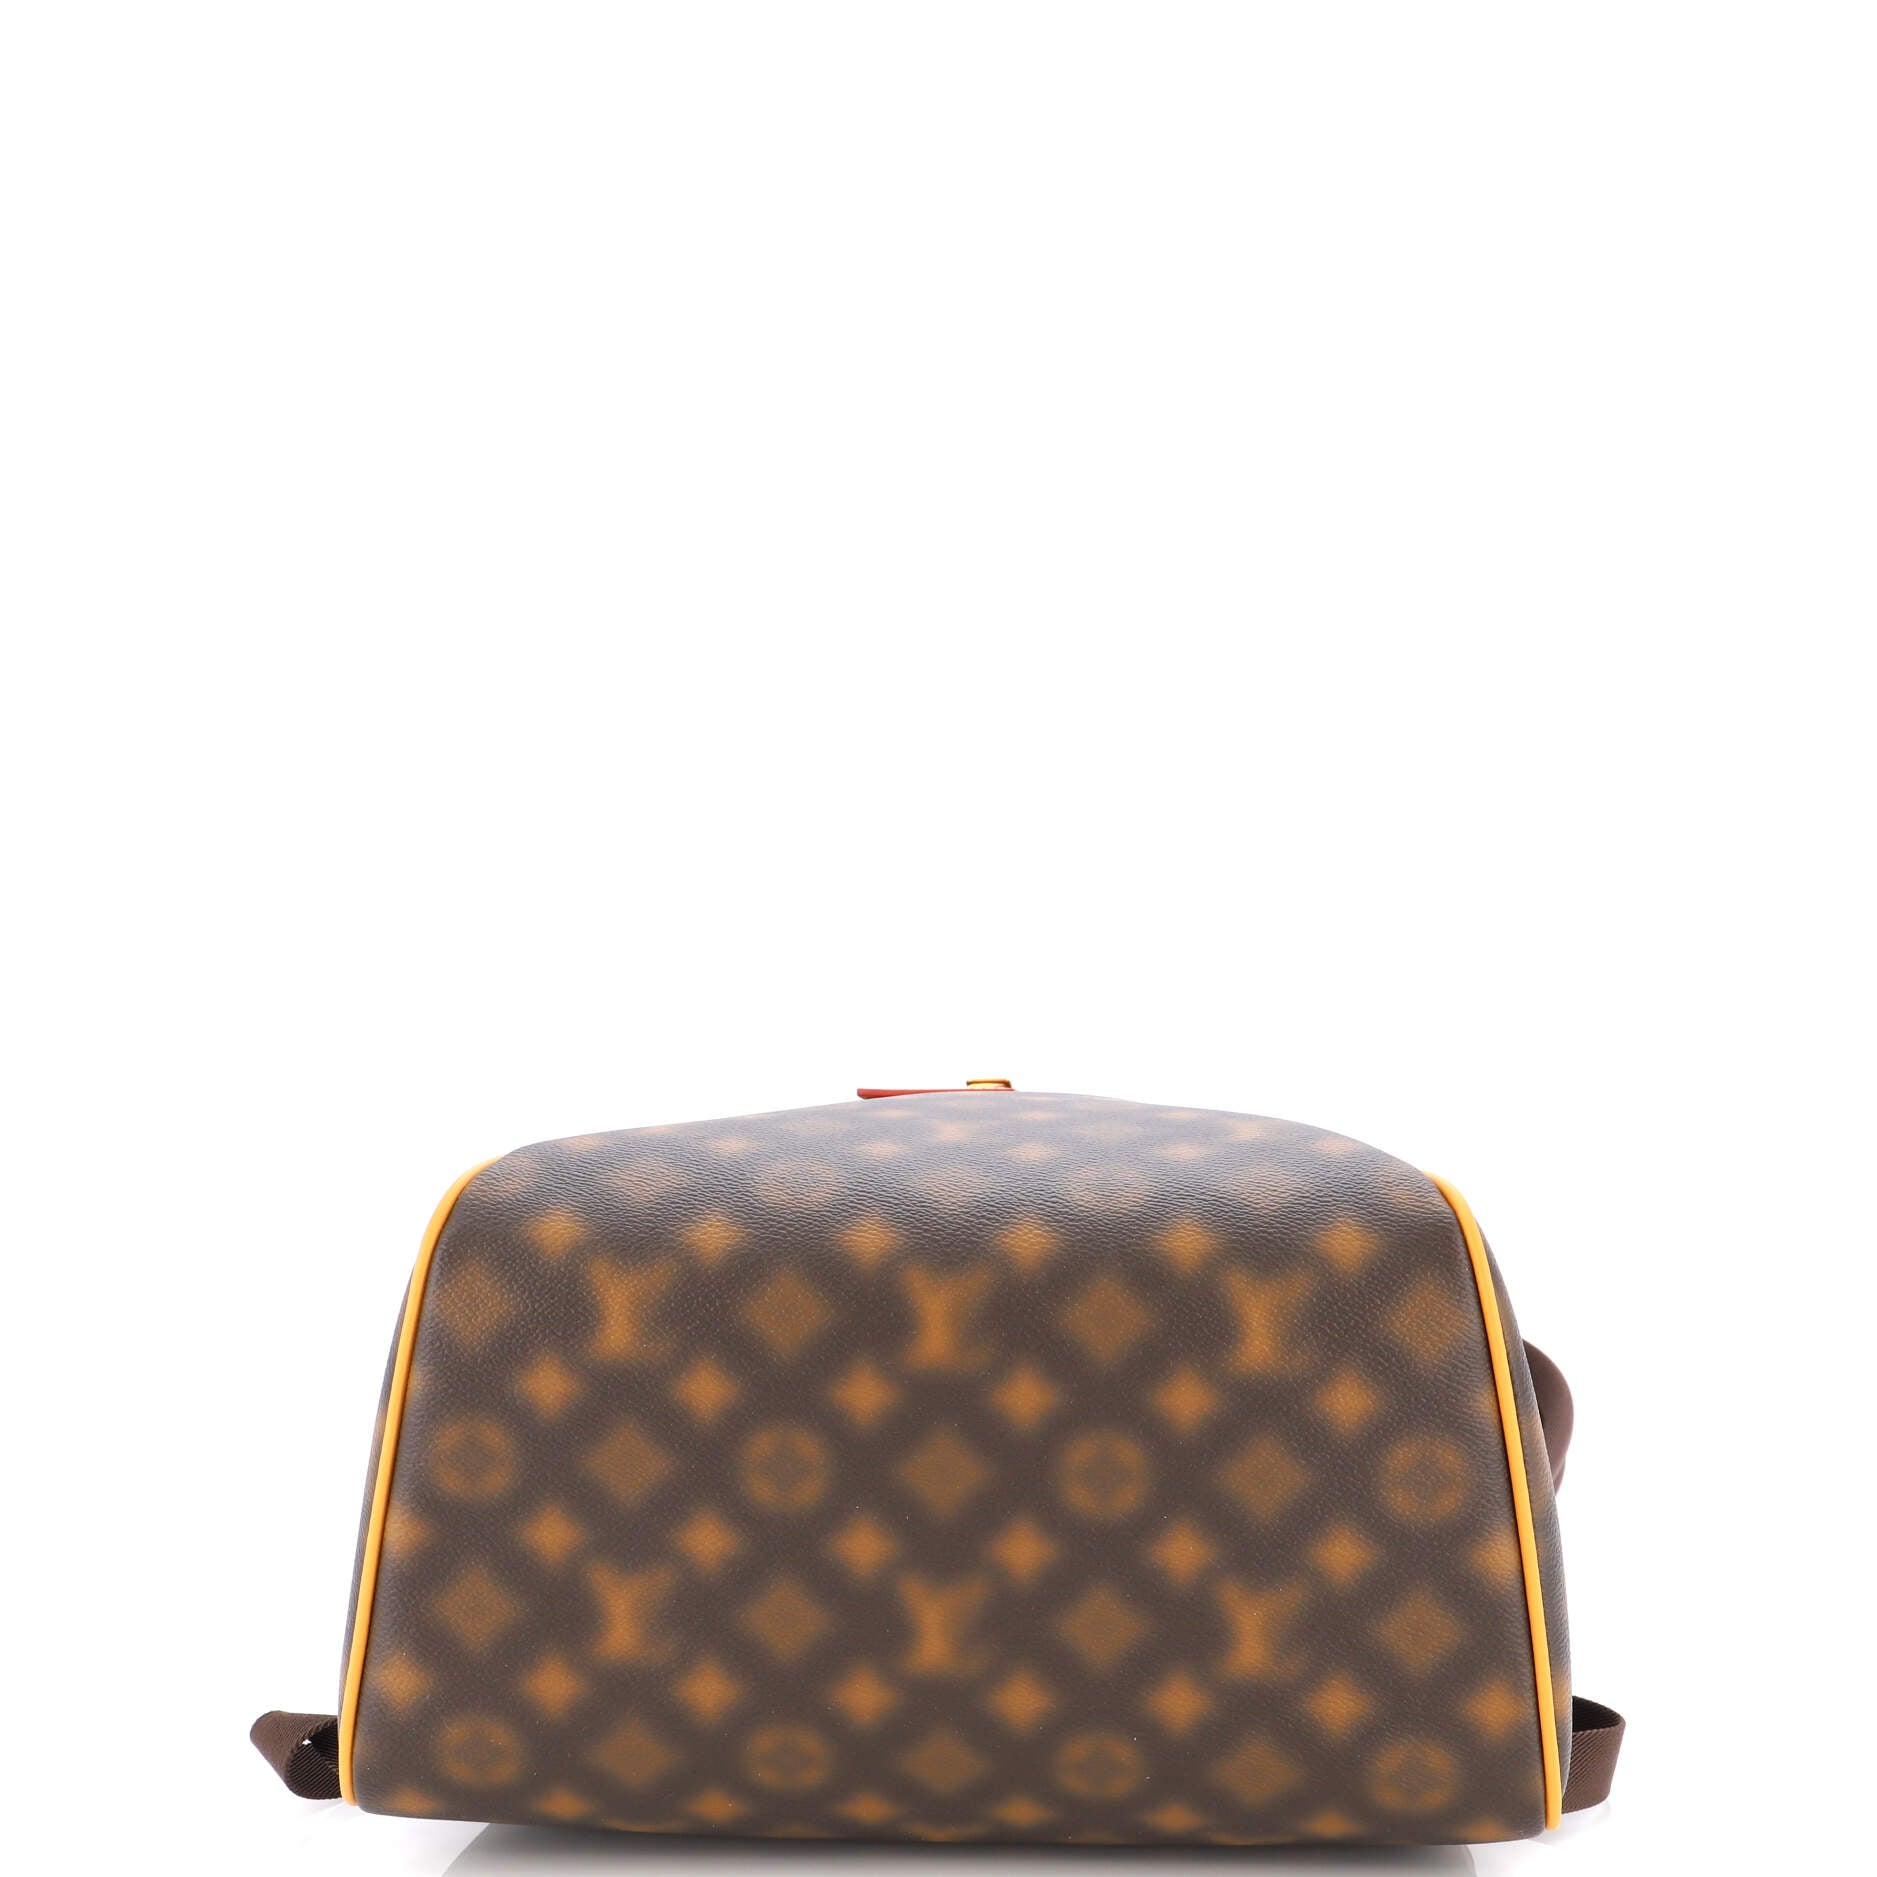 Louis Vuitton Ellipse Backpack  THIS IS NOT MONOGRAM WAVY BLURRY  FALL-WINTER 2022 